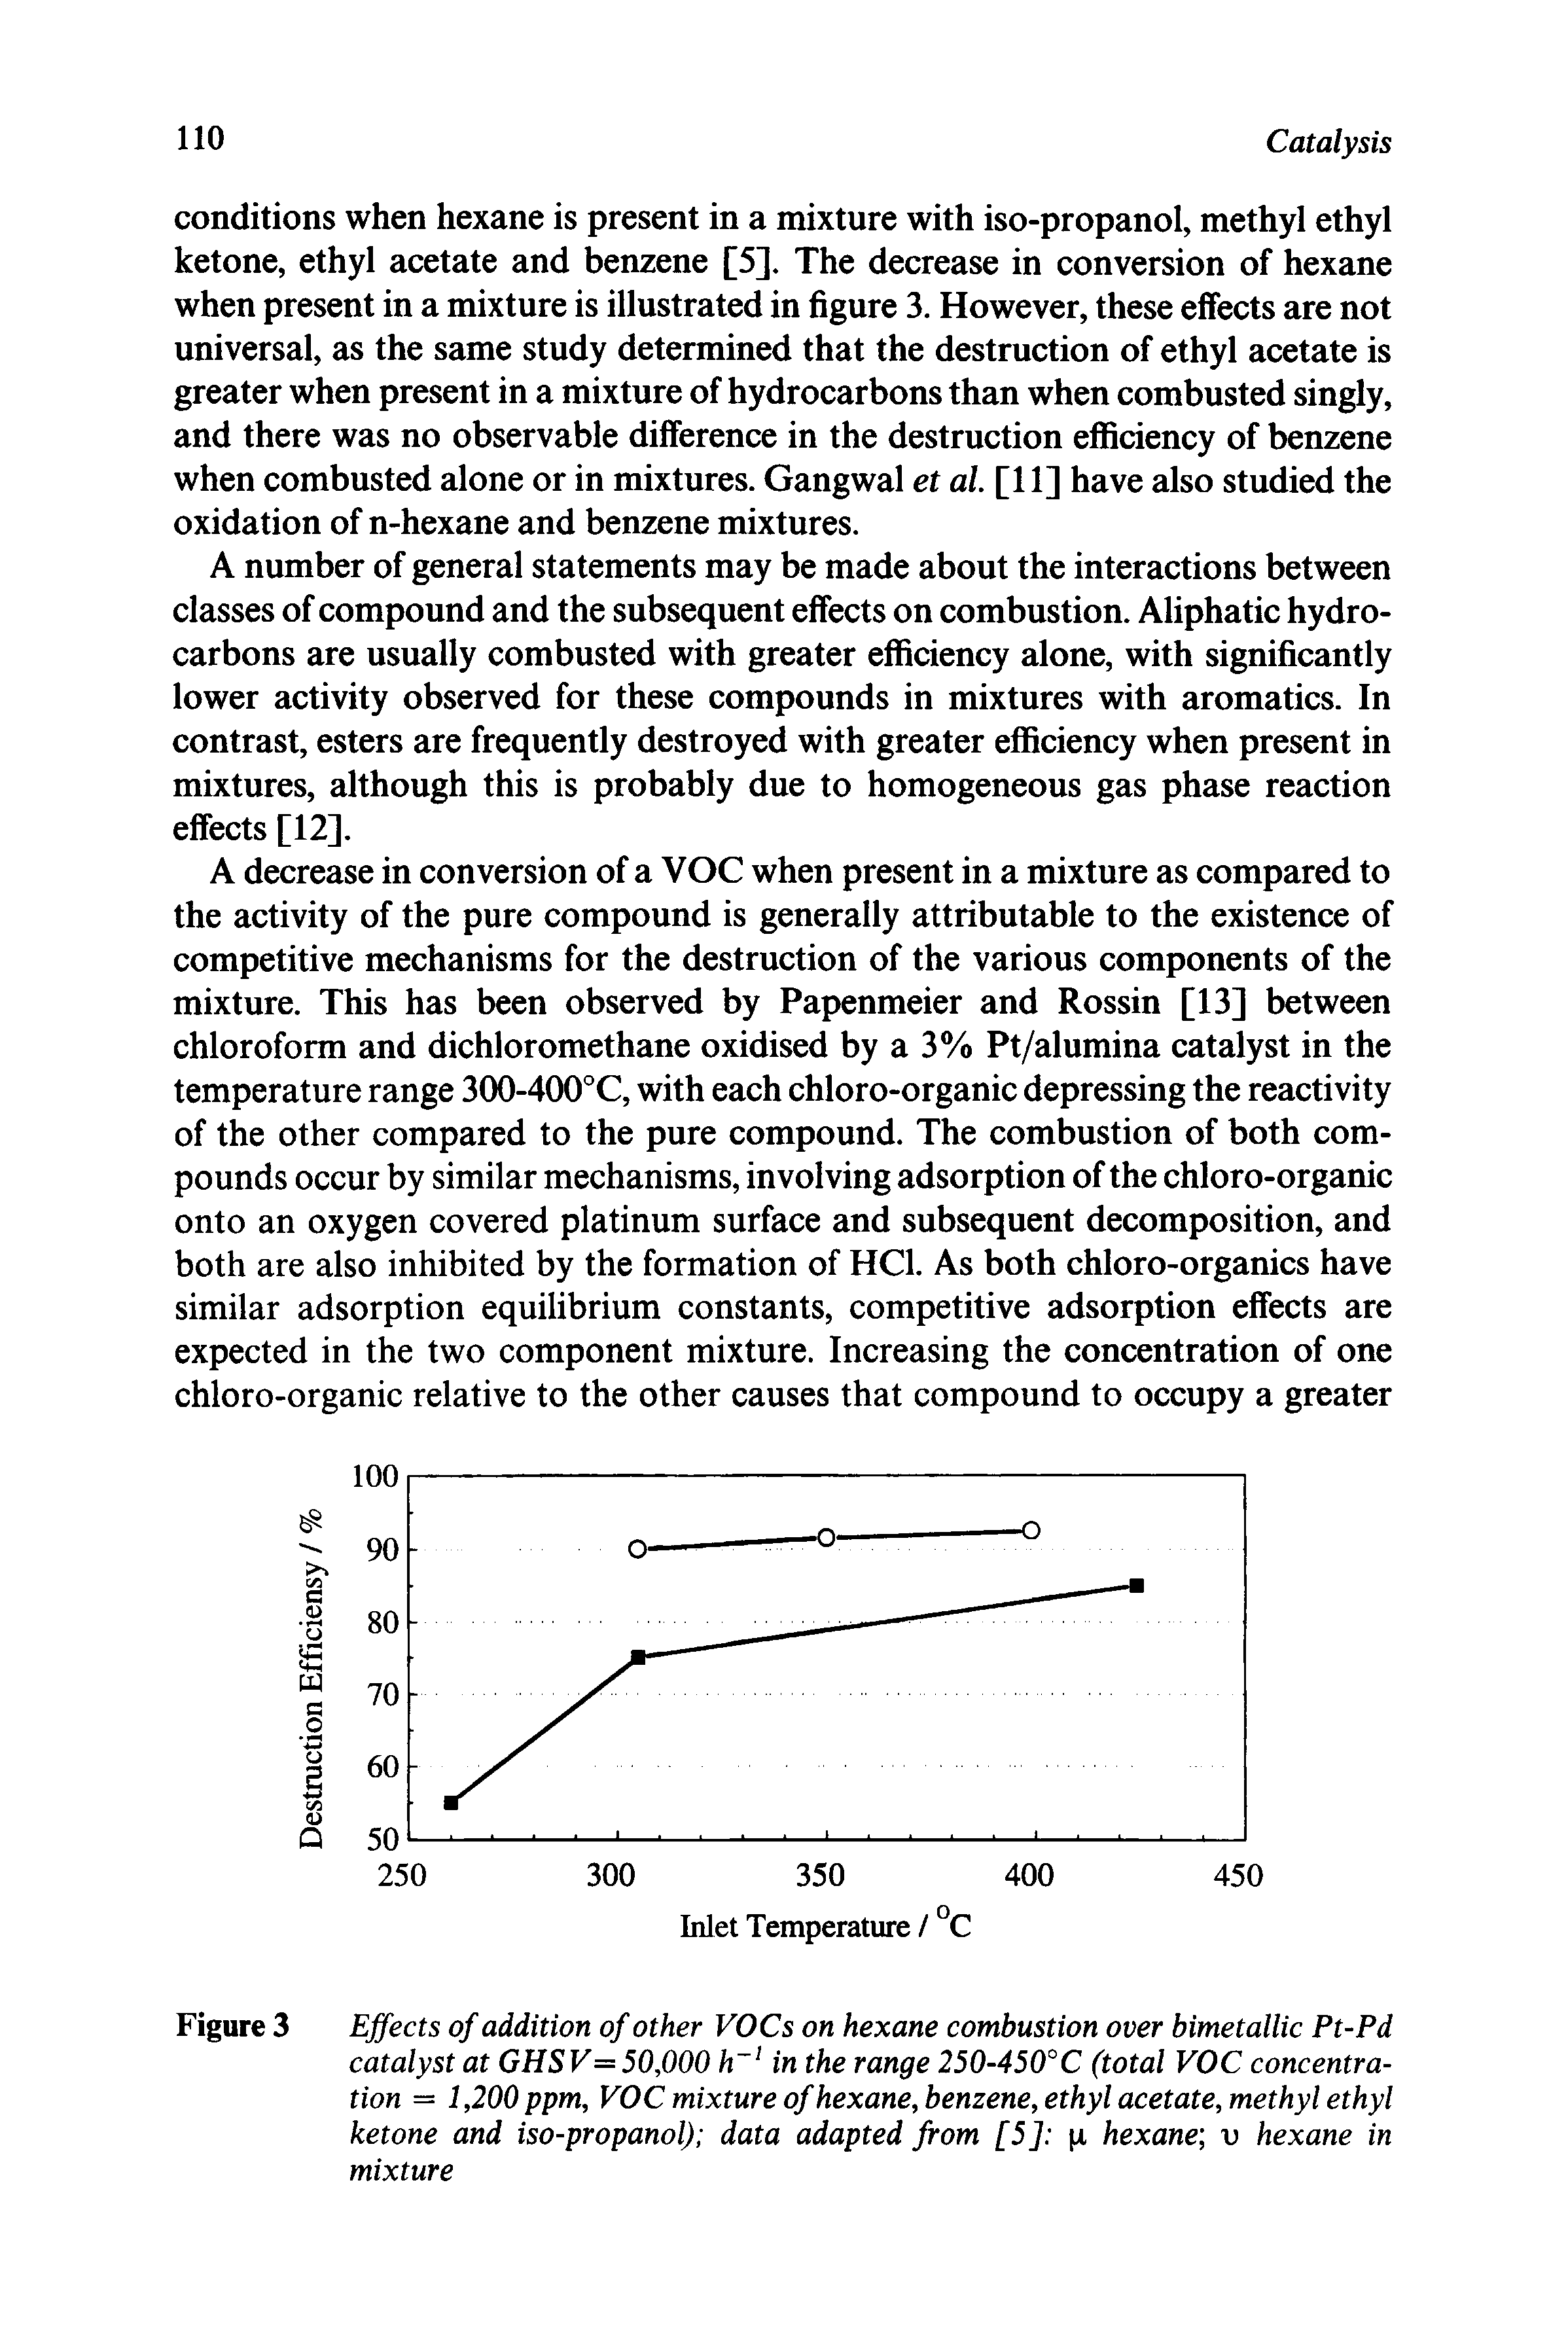 Figure 3 Effects of addition of other VOCs on hexane combustion over bimetallic Pt-Pd catalyst at GHSV= 50,000 h in the range 250-450°C (total VOC concentration = 1,200 ppm, VOC mixture of hexane, benzene, ethyl acetate, methyl ethyl ketone and iso-propanol) data adapted from [5] x hexane u hexane in mixture...